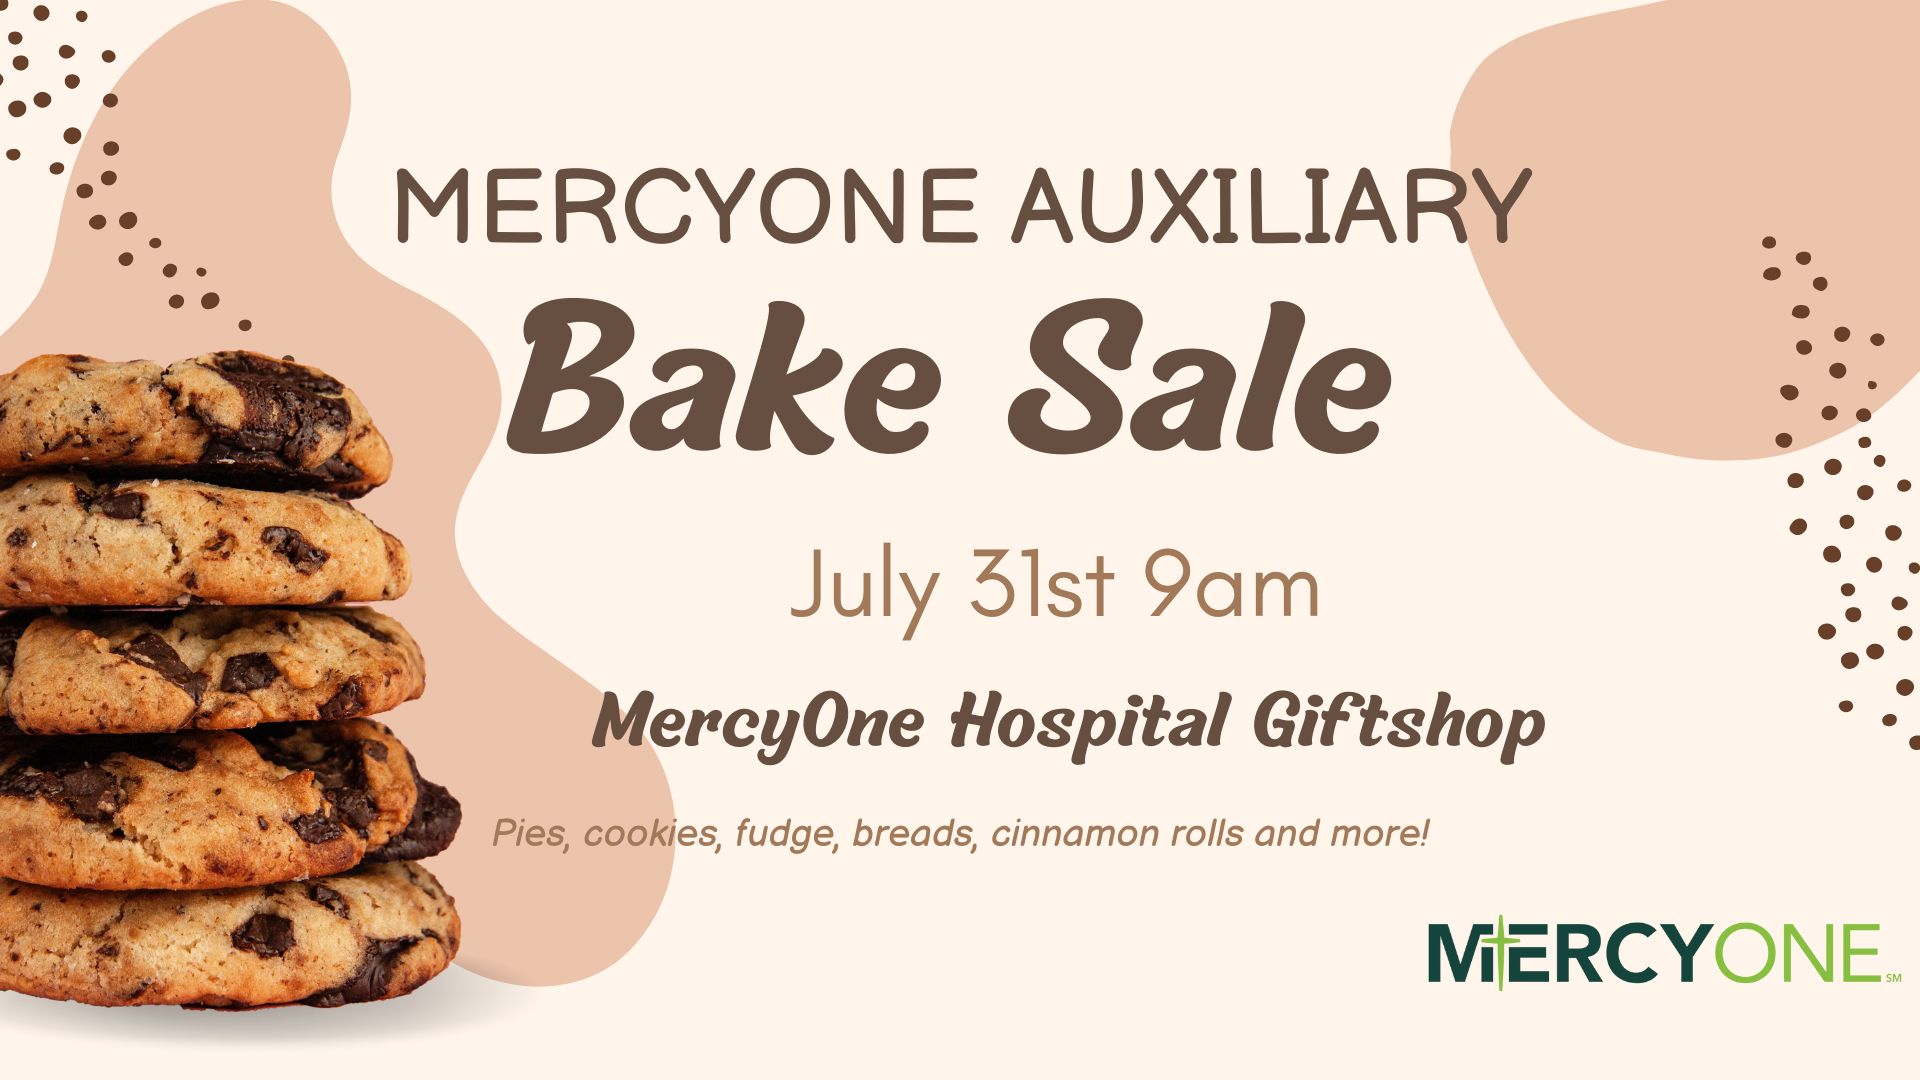 MercyOne Auxiliary Bake Sale July 31st